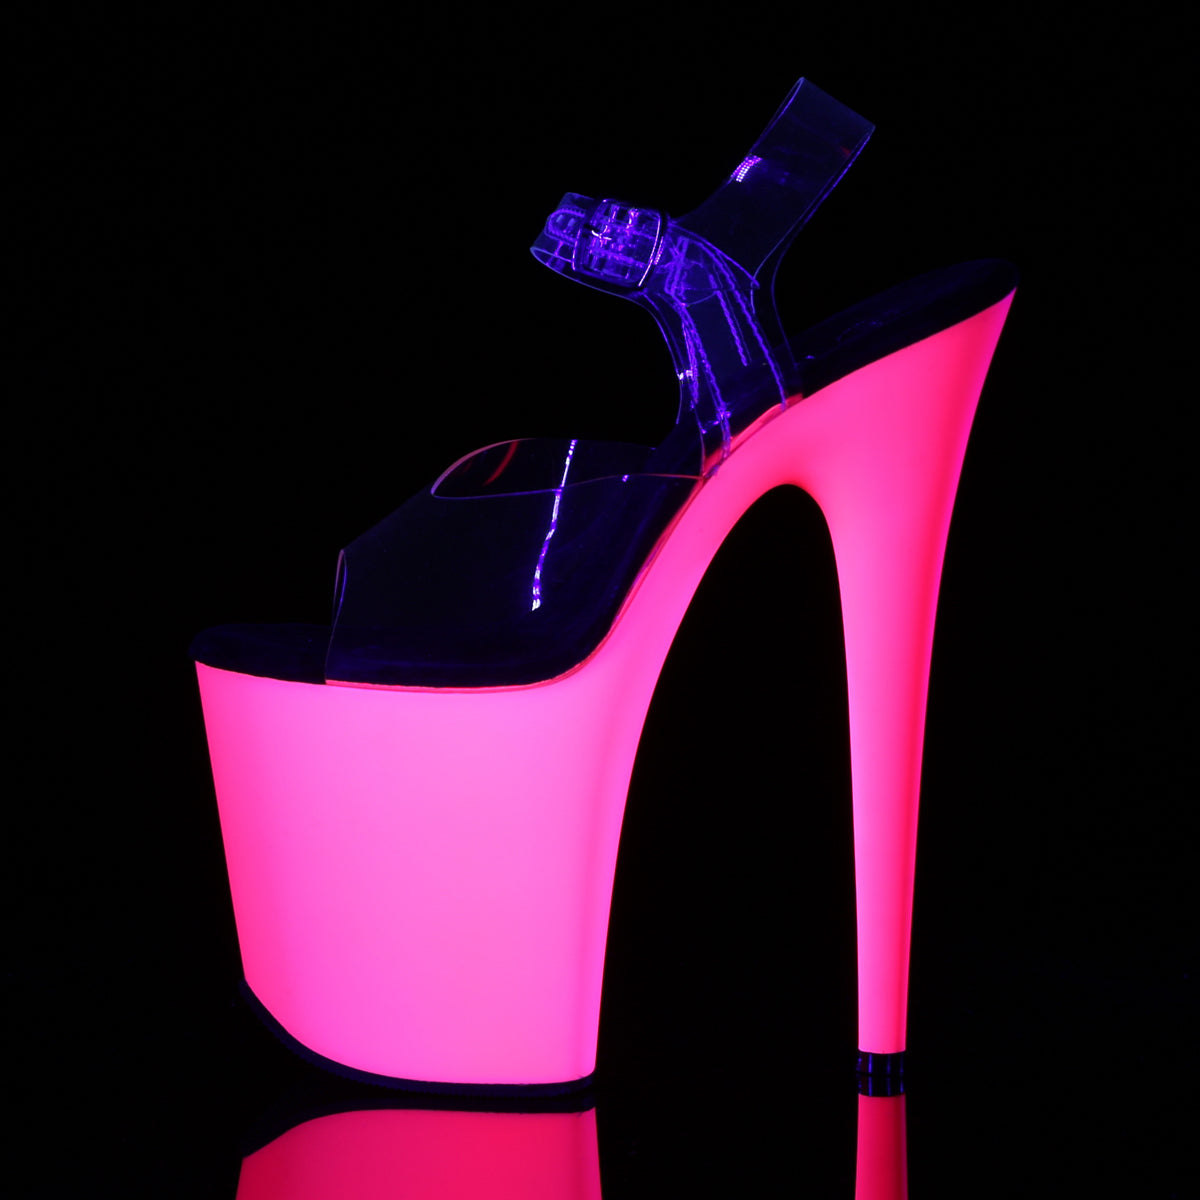 ADORE-708UVG | 7 INCH CLEAR/NEON OPAL GLITTER PLATFORM HEEL – The Pole Room